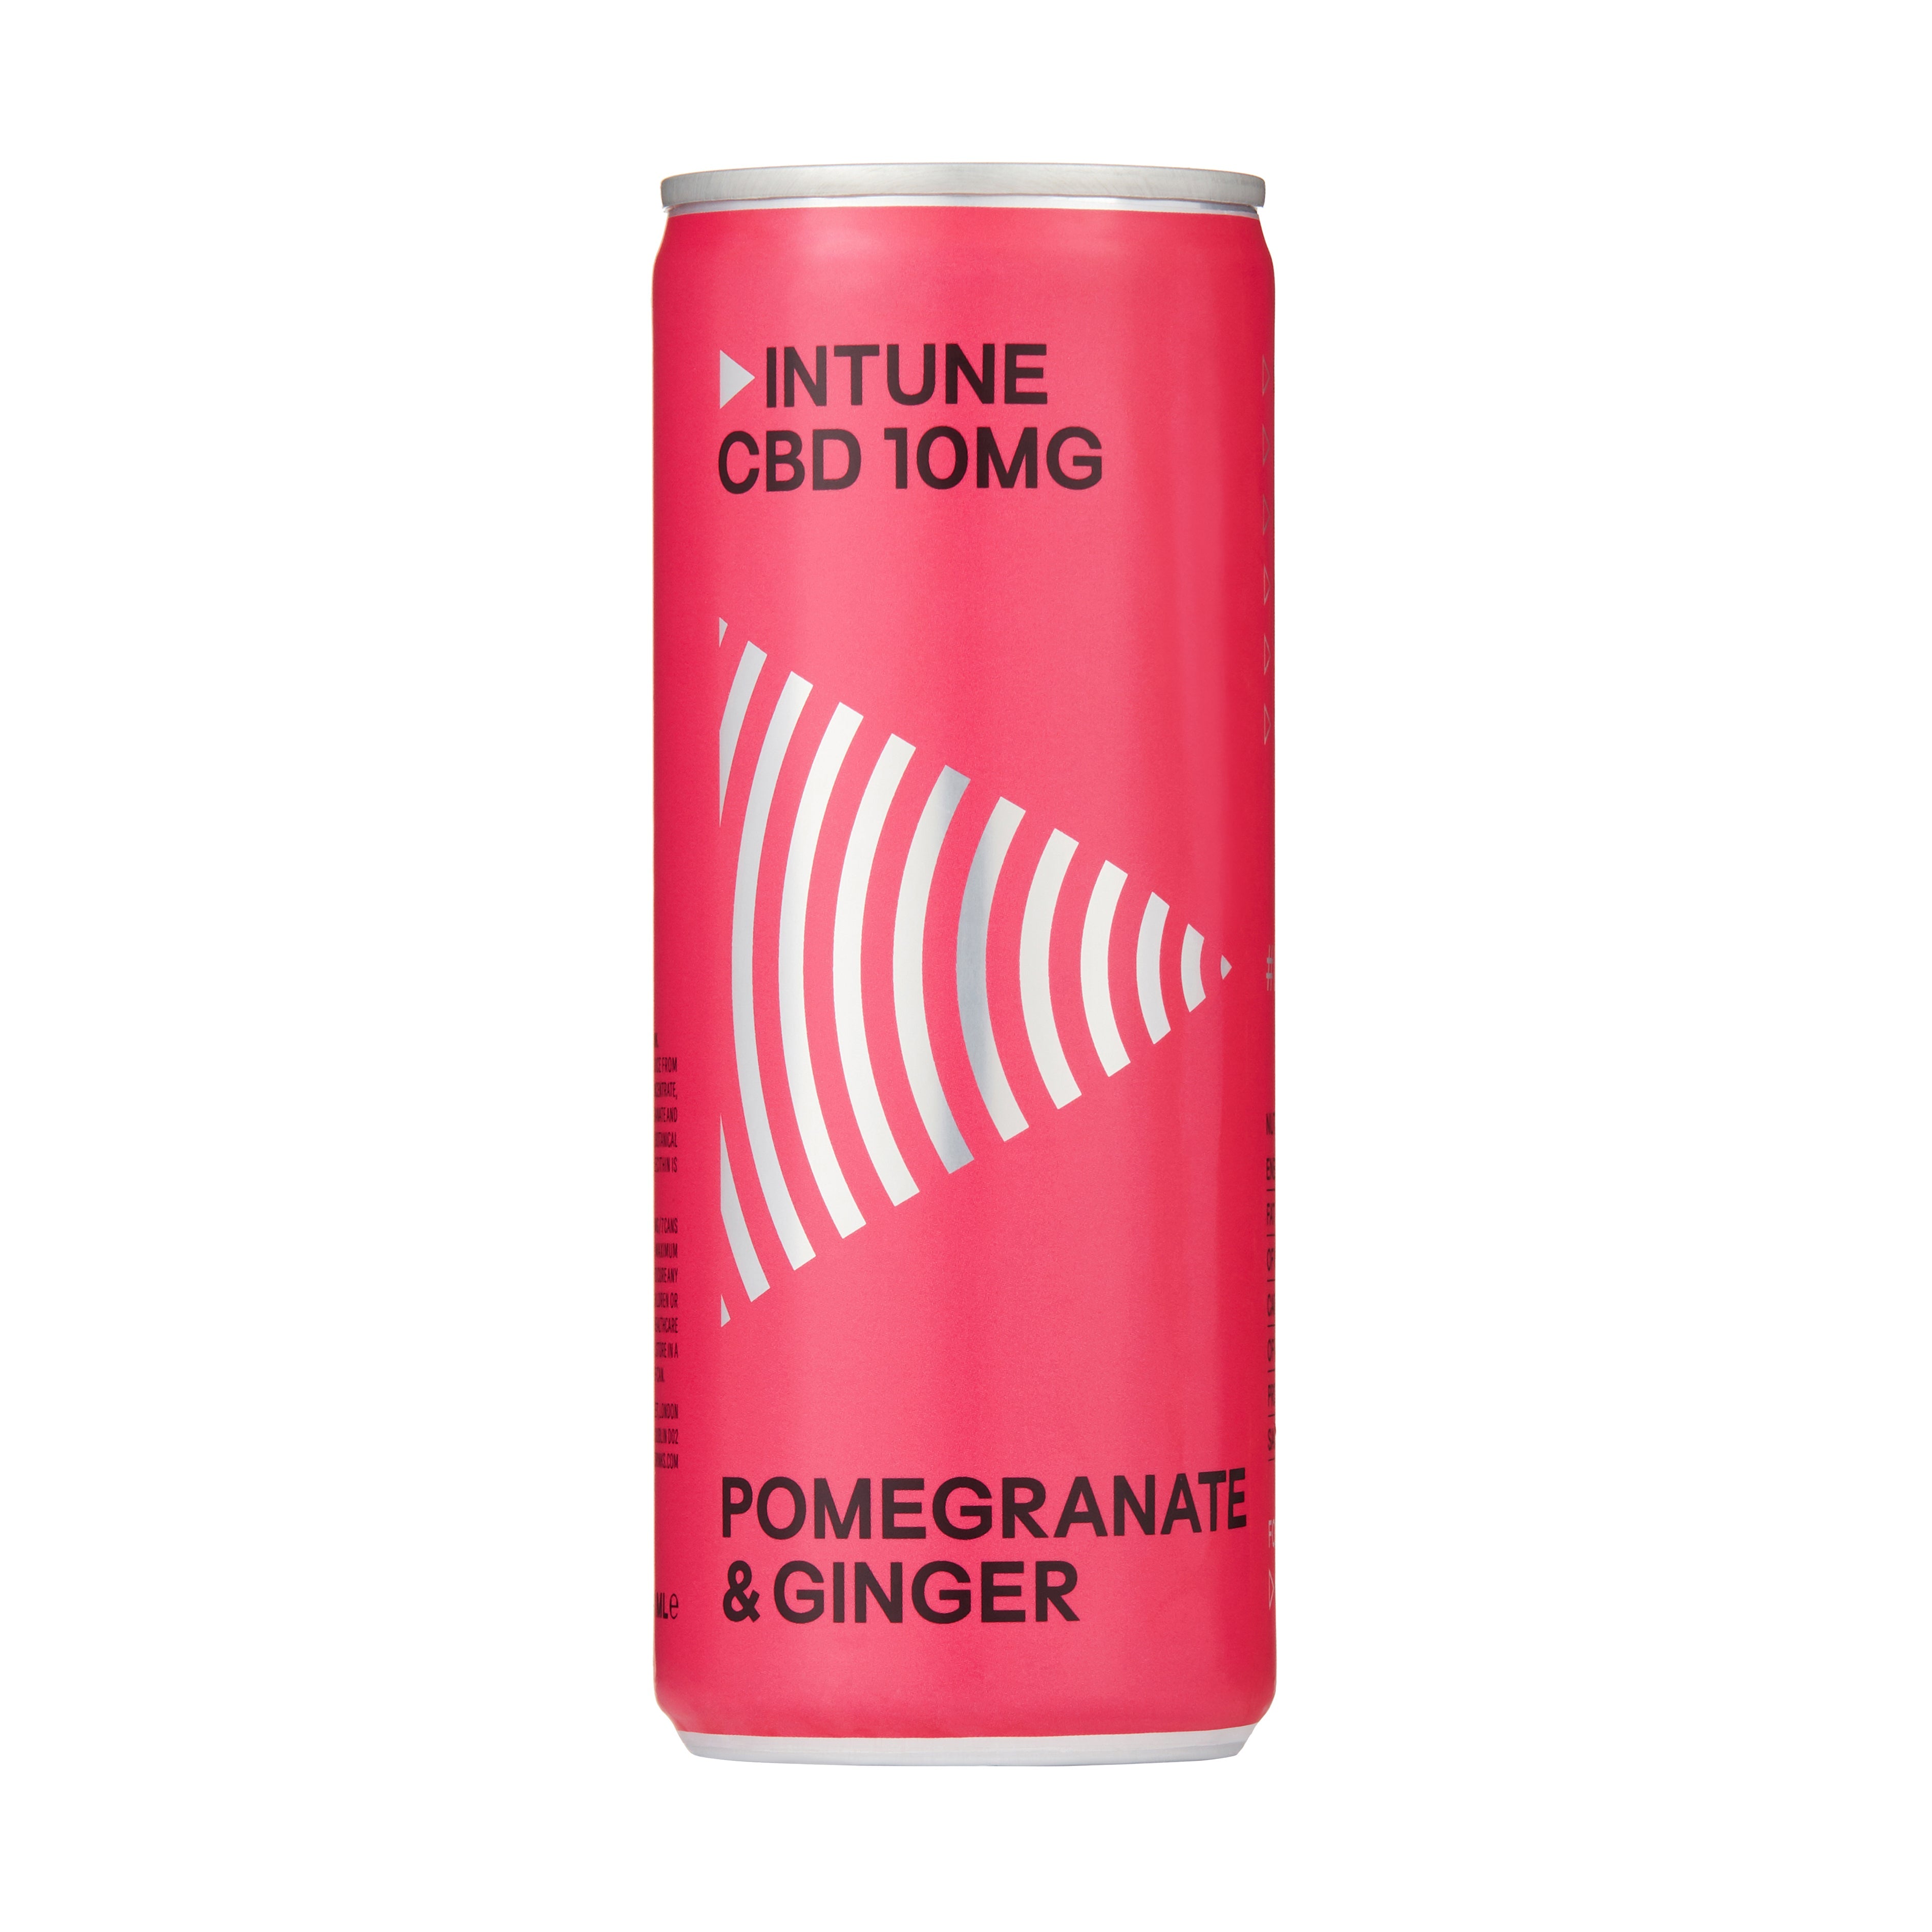 Intune Drinks - Pomegranate & Ginger CBD Drink // Stores Supply // Intune